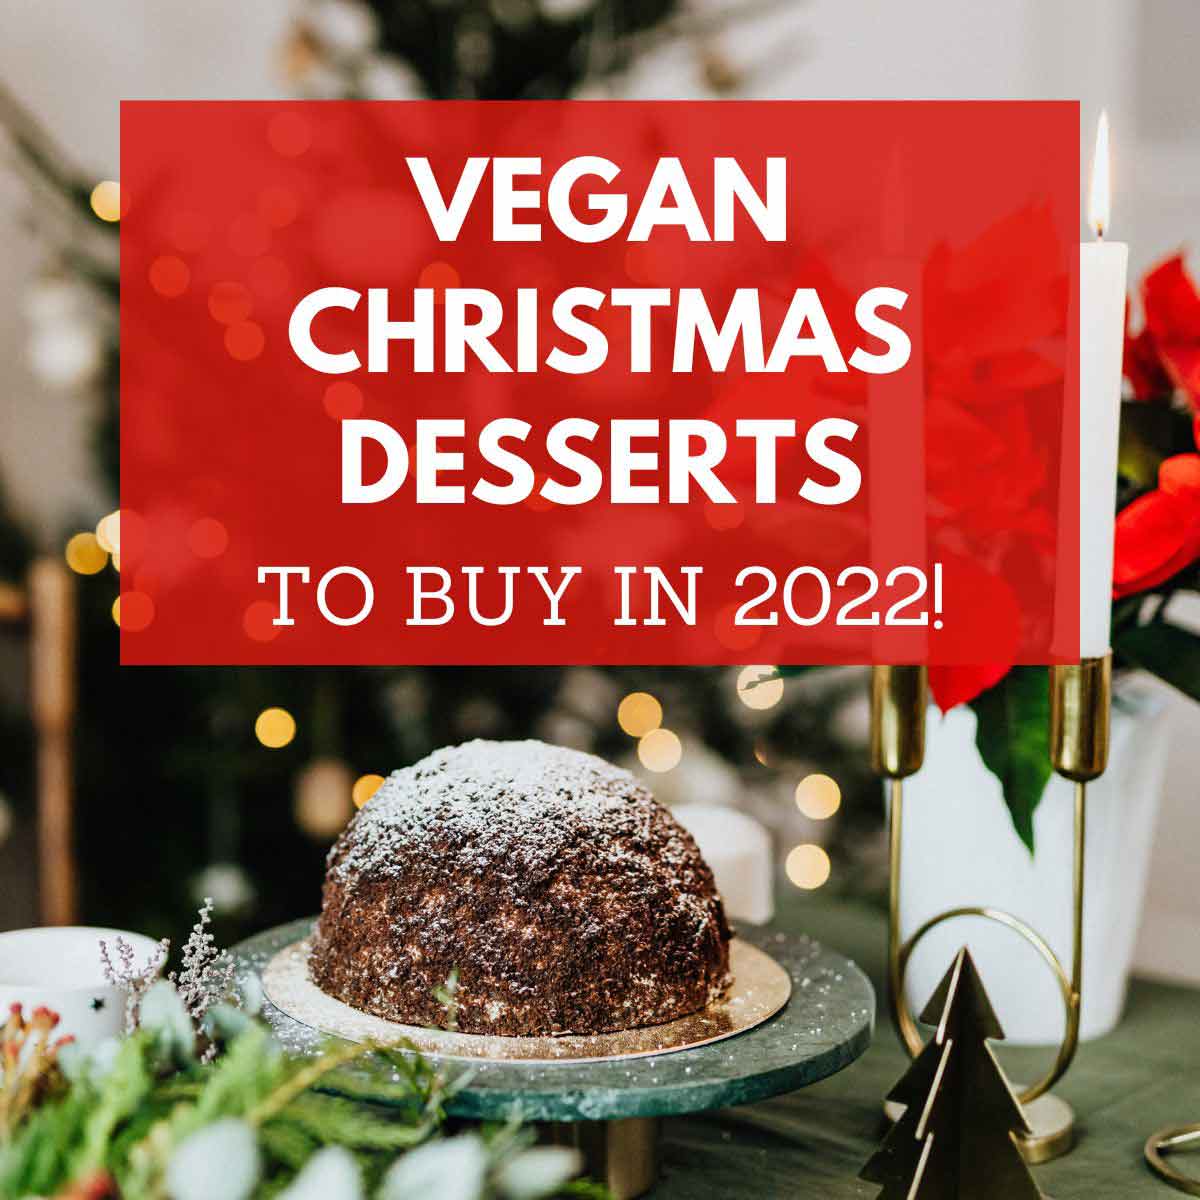 Best Vegan Christmas Desserts To Buy From Supermarkets Thumbnail Image